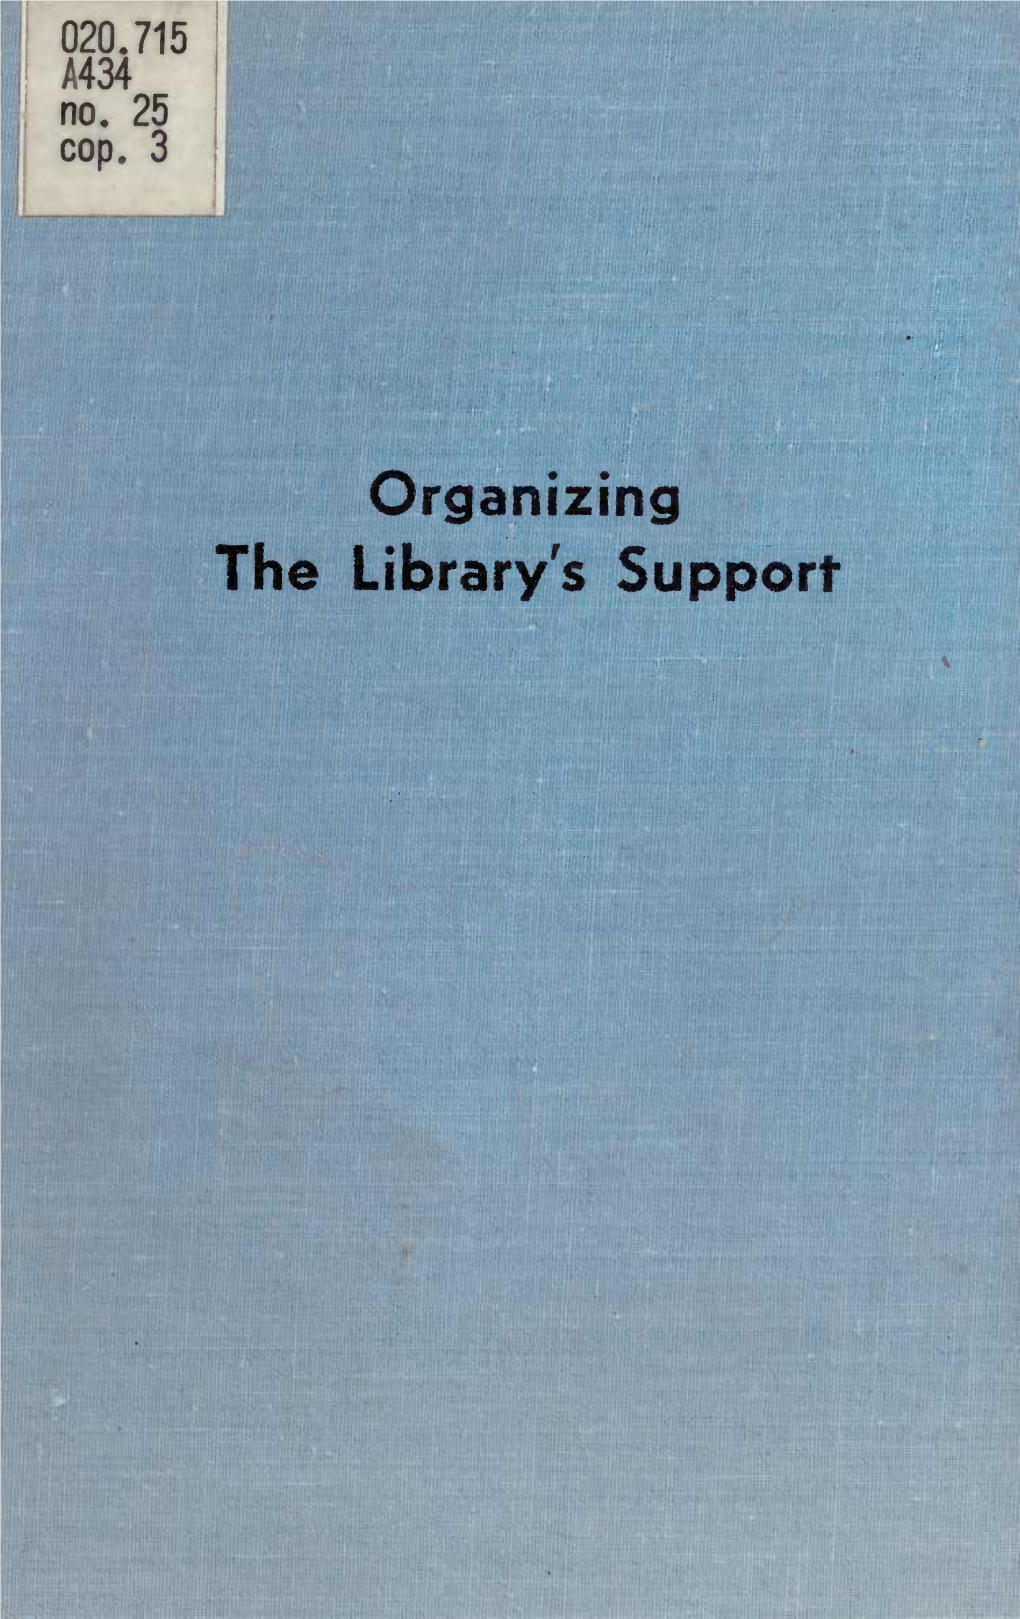 Organizing the Library's Support UNIVERSITY of ILLINOIS LIBRARY URBANA-GHAMPAIQN F~ .Or M.T.Rt